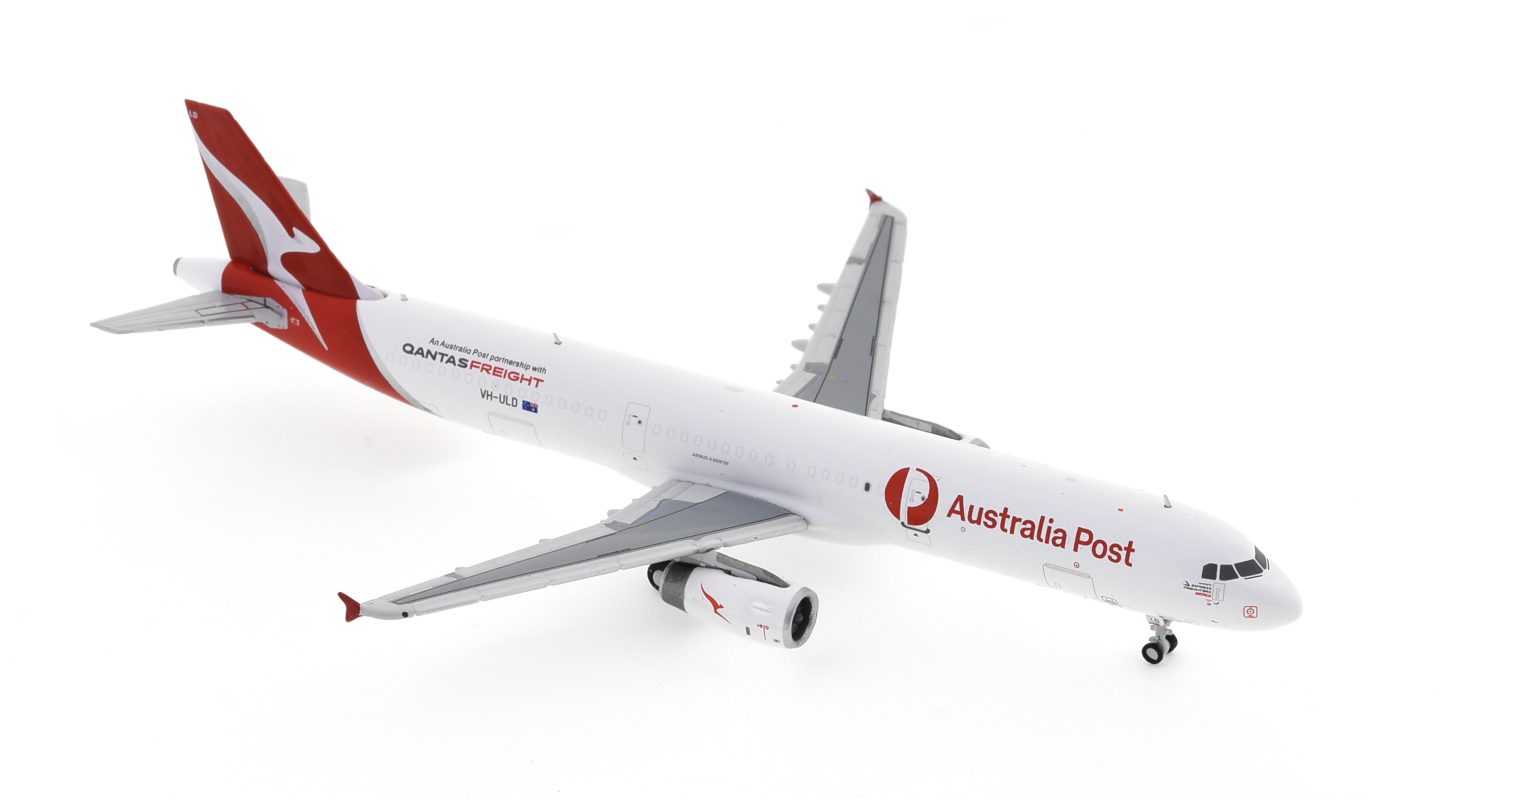 Front starboard side view of Gemini Jets GJQFA1955 - 1/400 scale diecast model Airbus A321P2F, registration VH-ULD in Qantas Freight-Australia Post's livery.